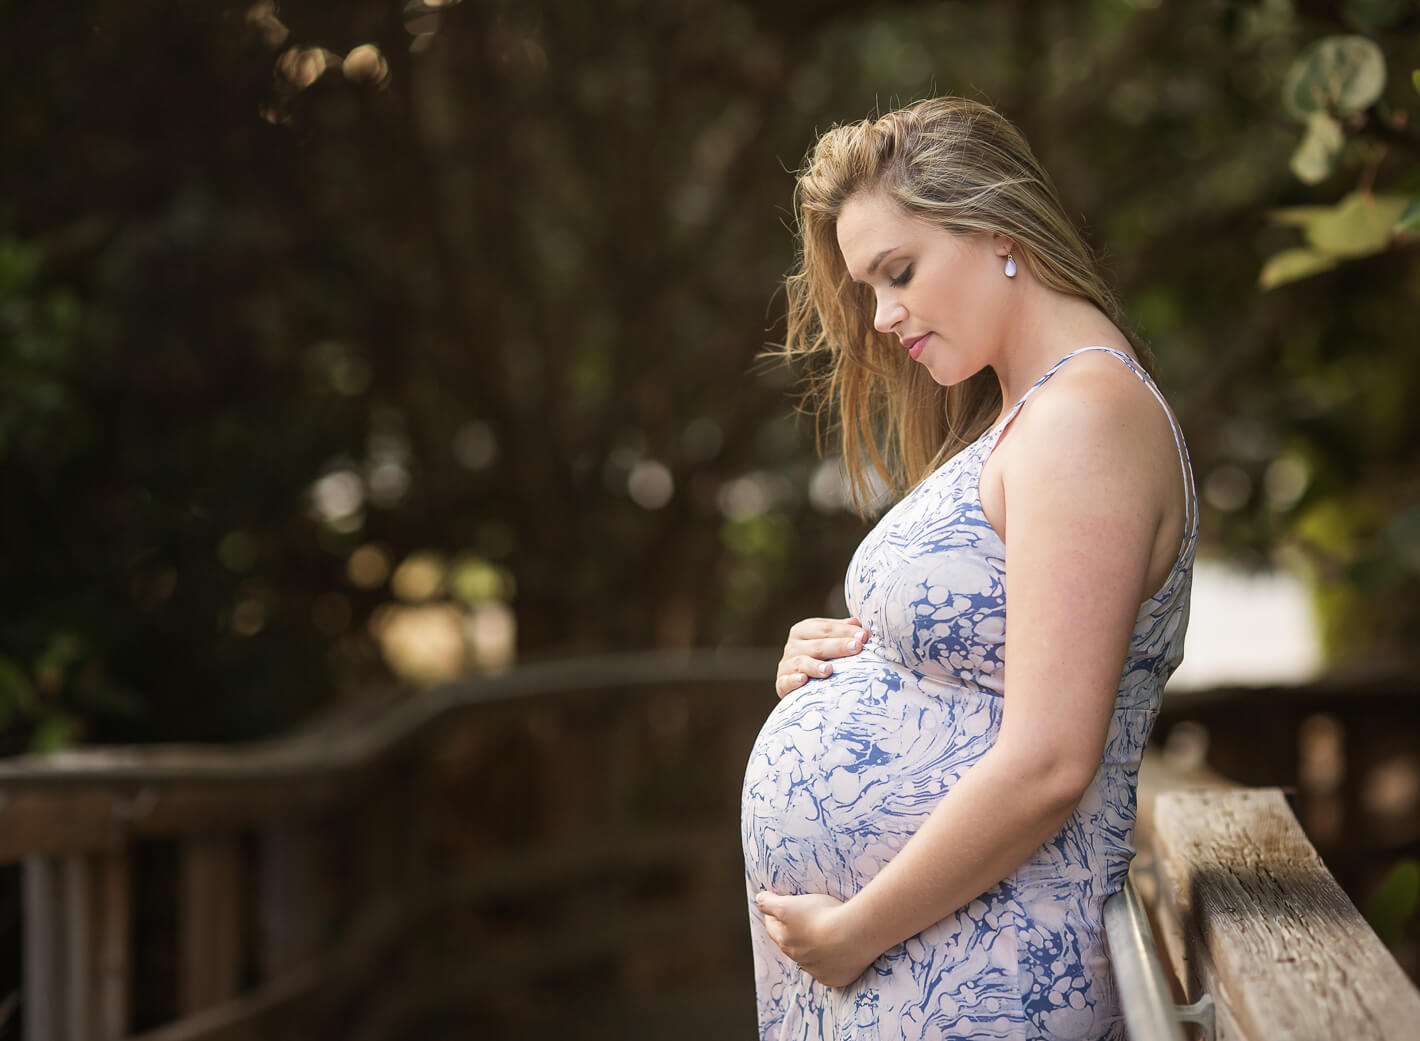 Mom-to-be looking down at her belly during maternity session